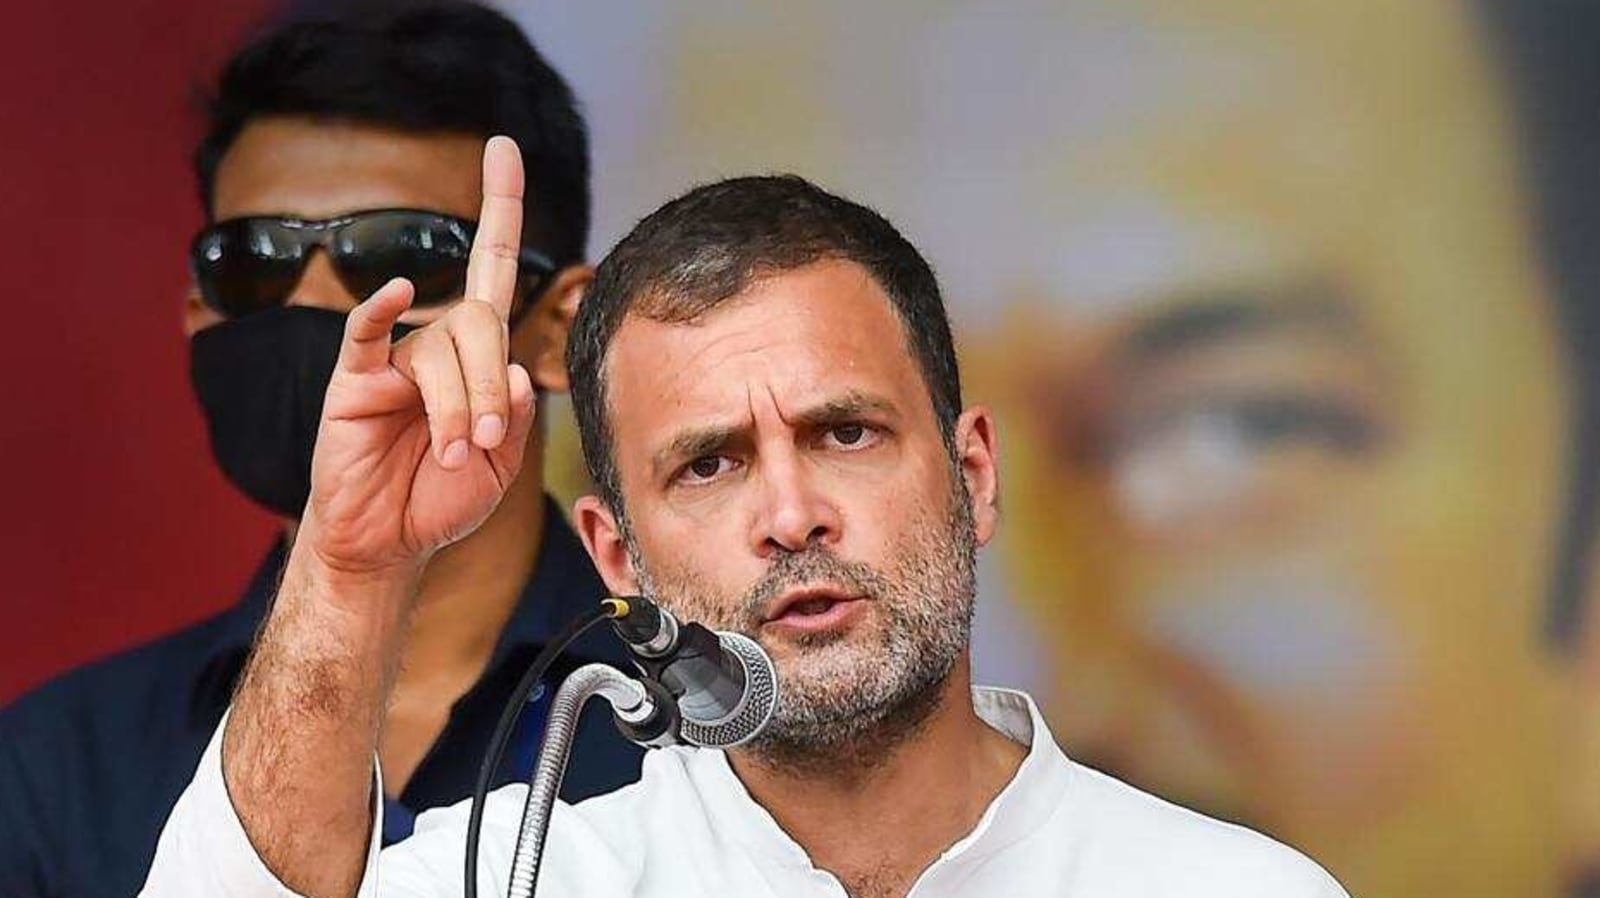 Rahul Gandhi raises migrants' issue, blames Centre's policy failure for Covid-19 2nd wave | Latest News India - Hindustan Times